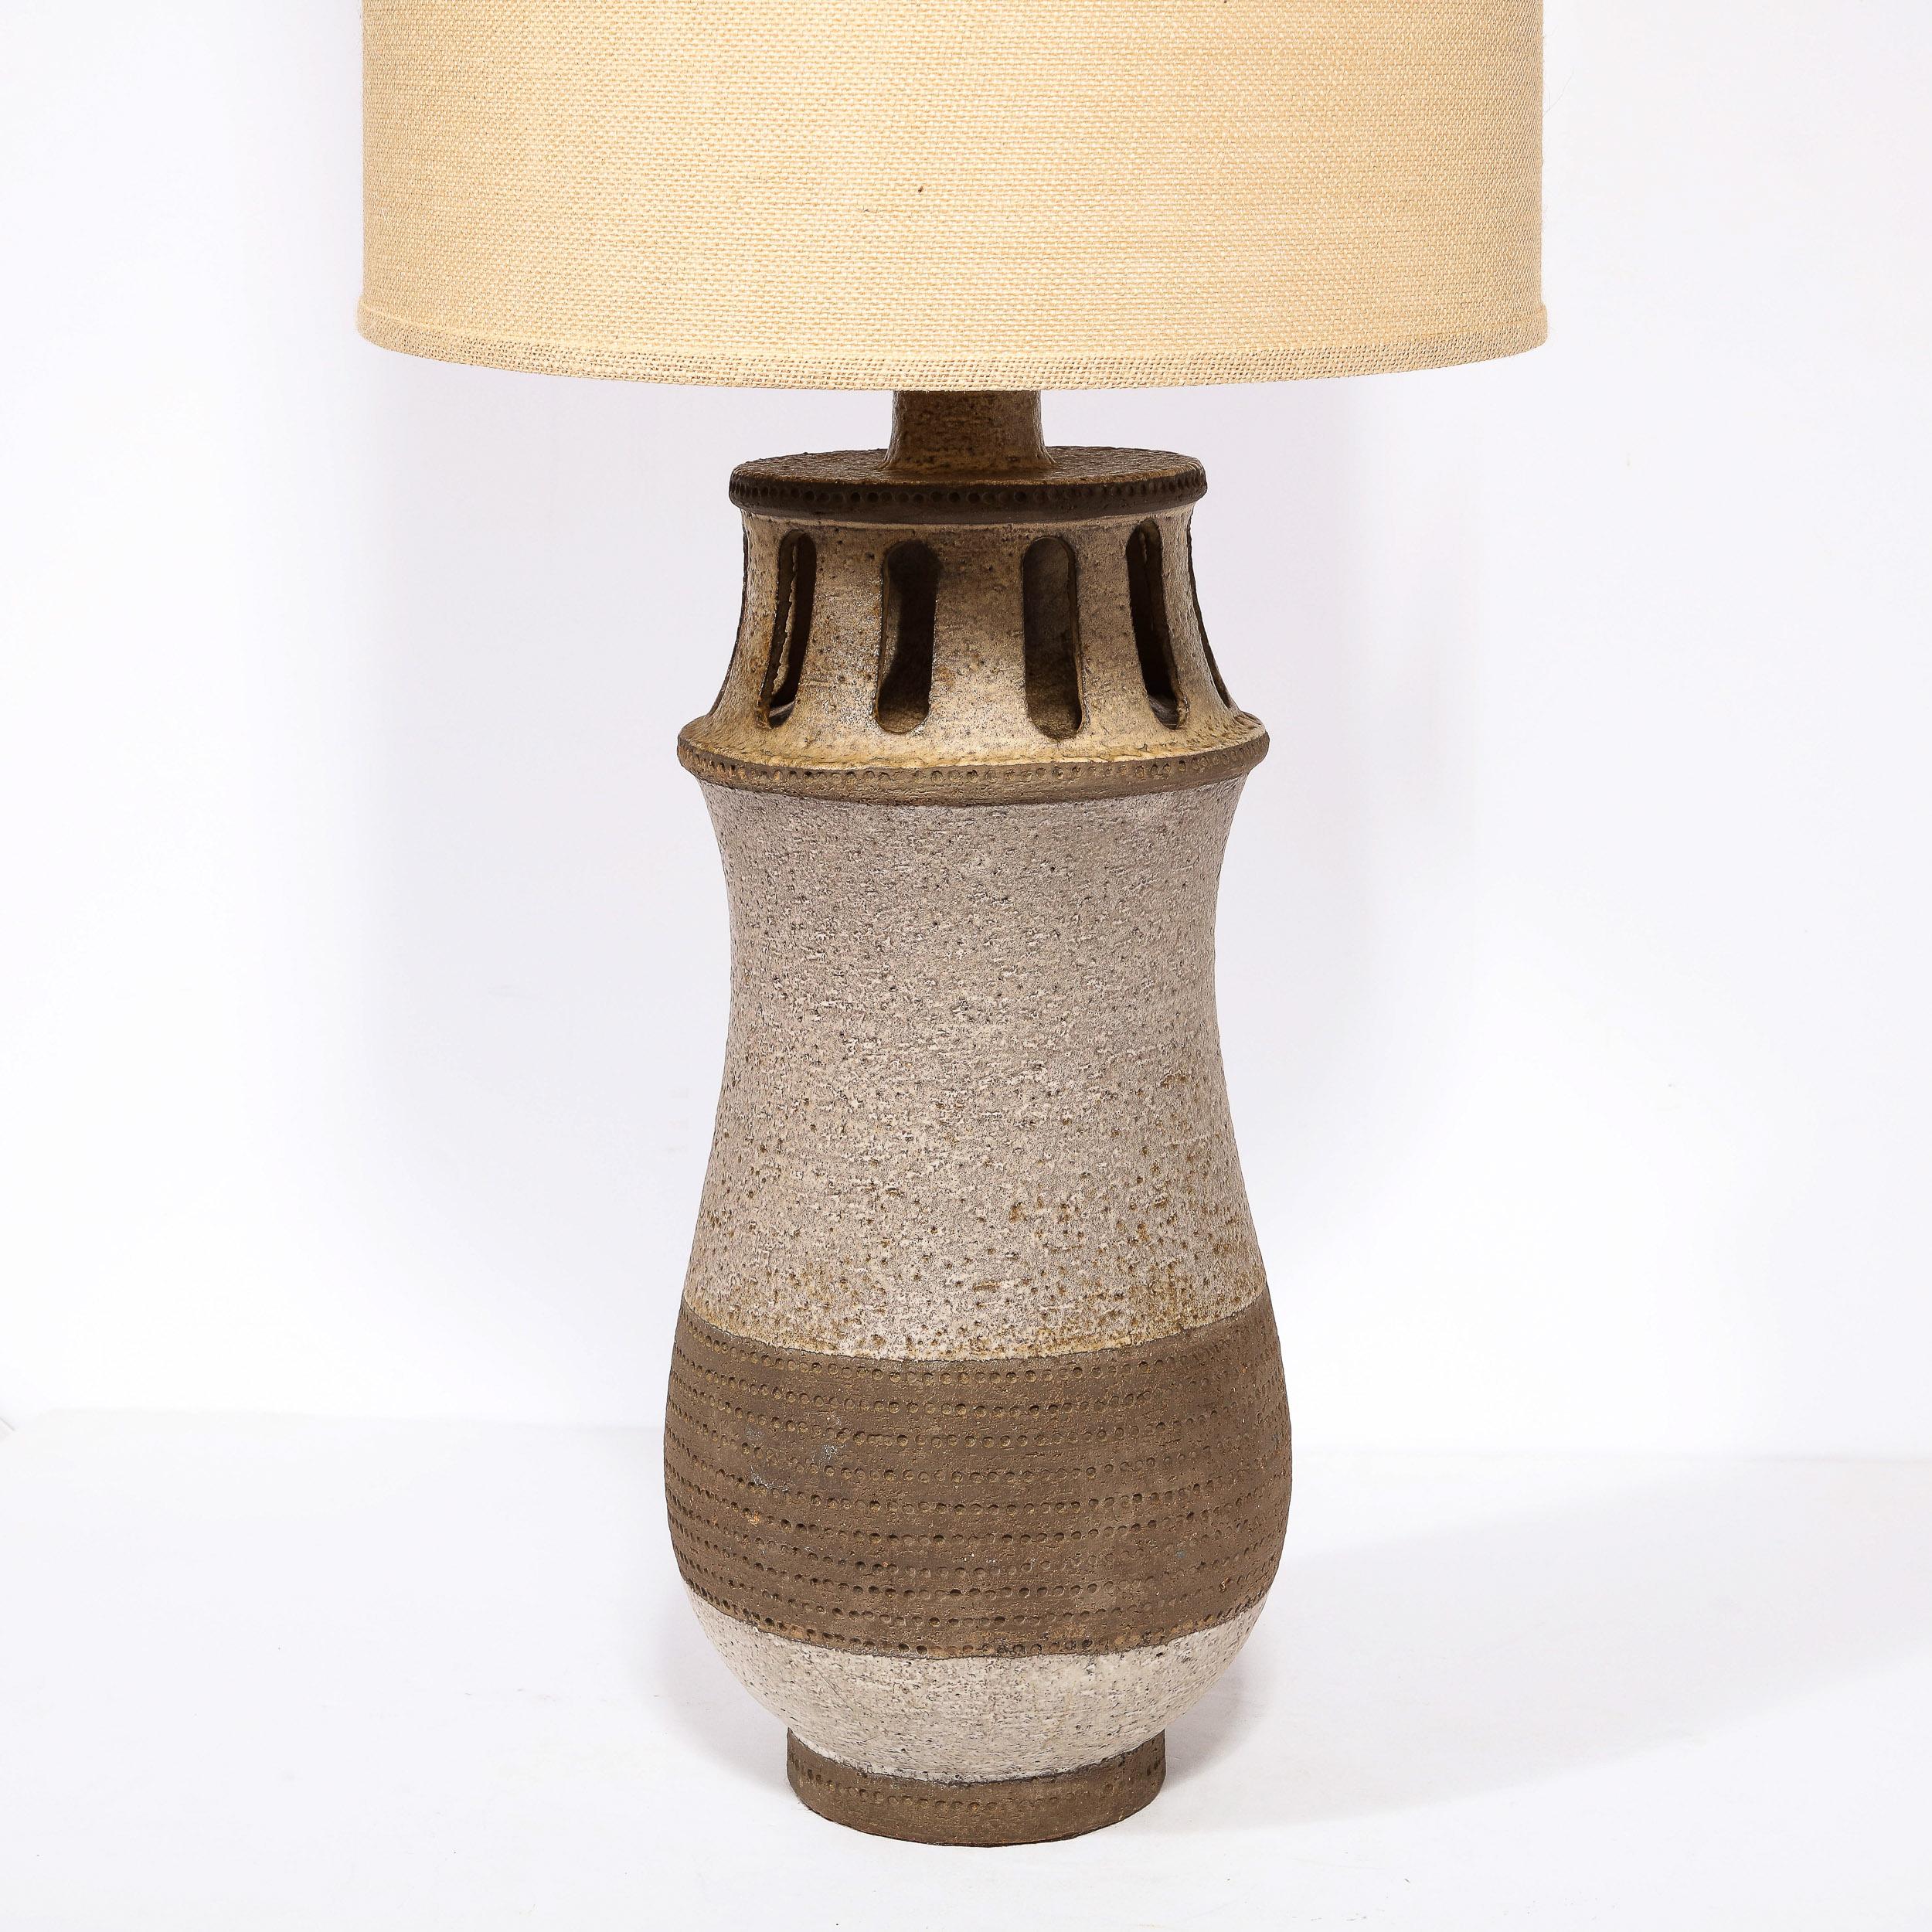 Mid-20th Century Mid-Century Modern Ceramic Table Lamp w/ Arcade Detailing and Raw Fiber Shade For Sale